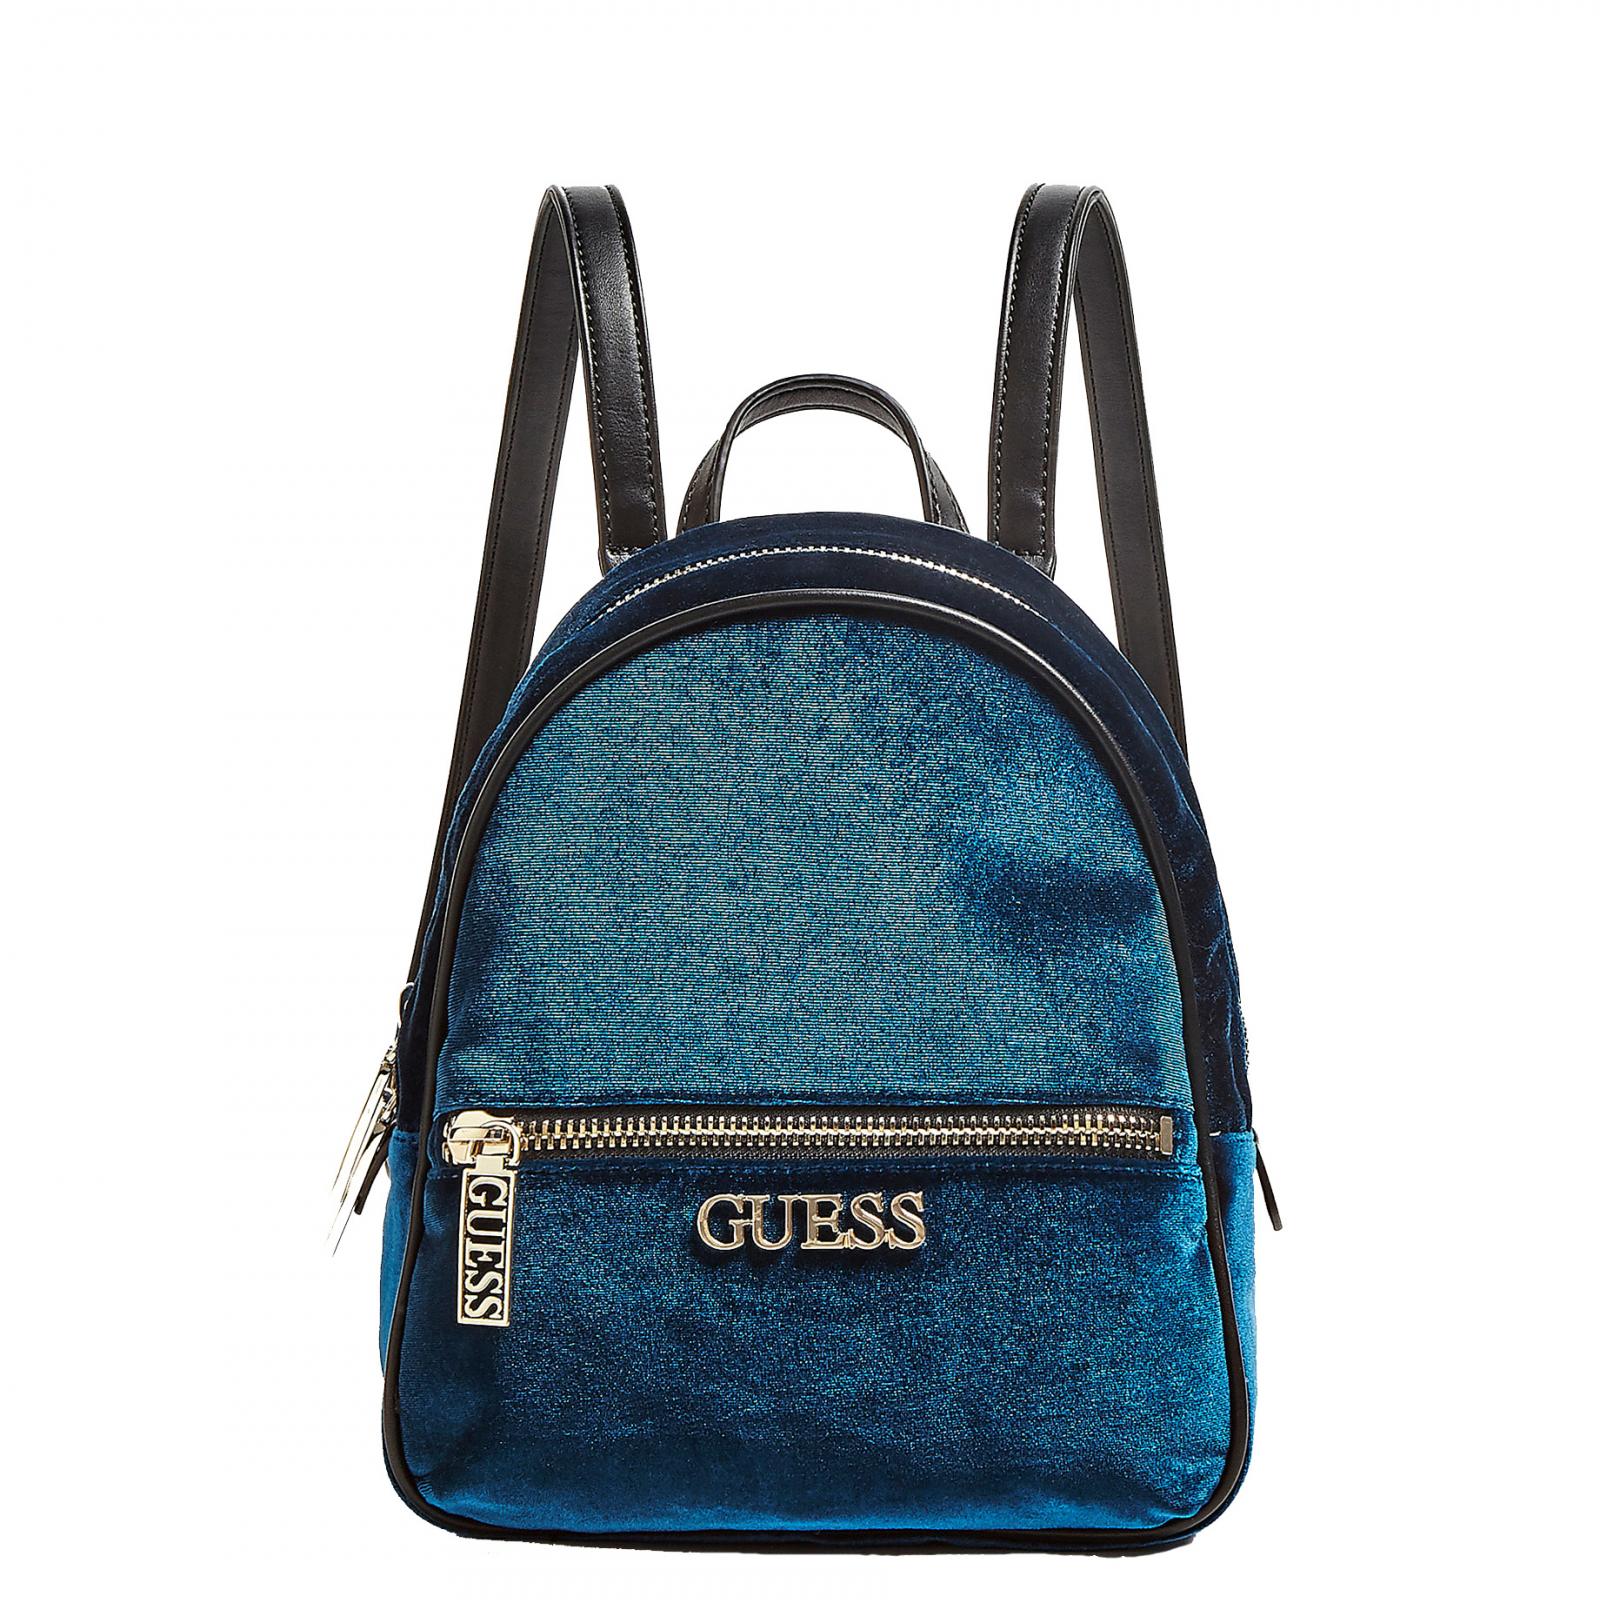 Guess Zainetto Ronnie effetto Velluto - TEAL